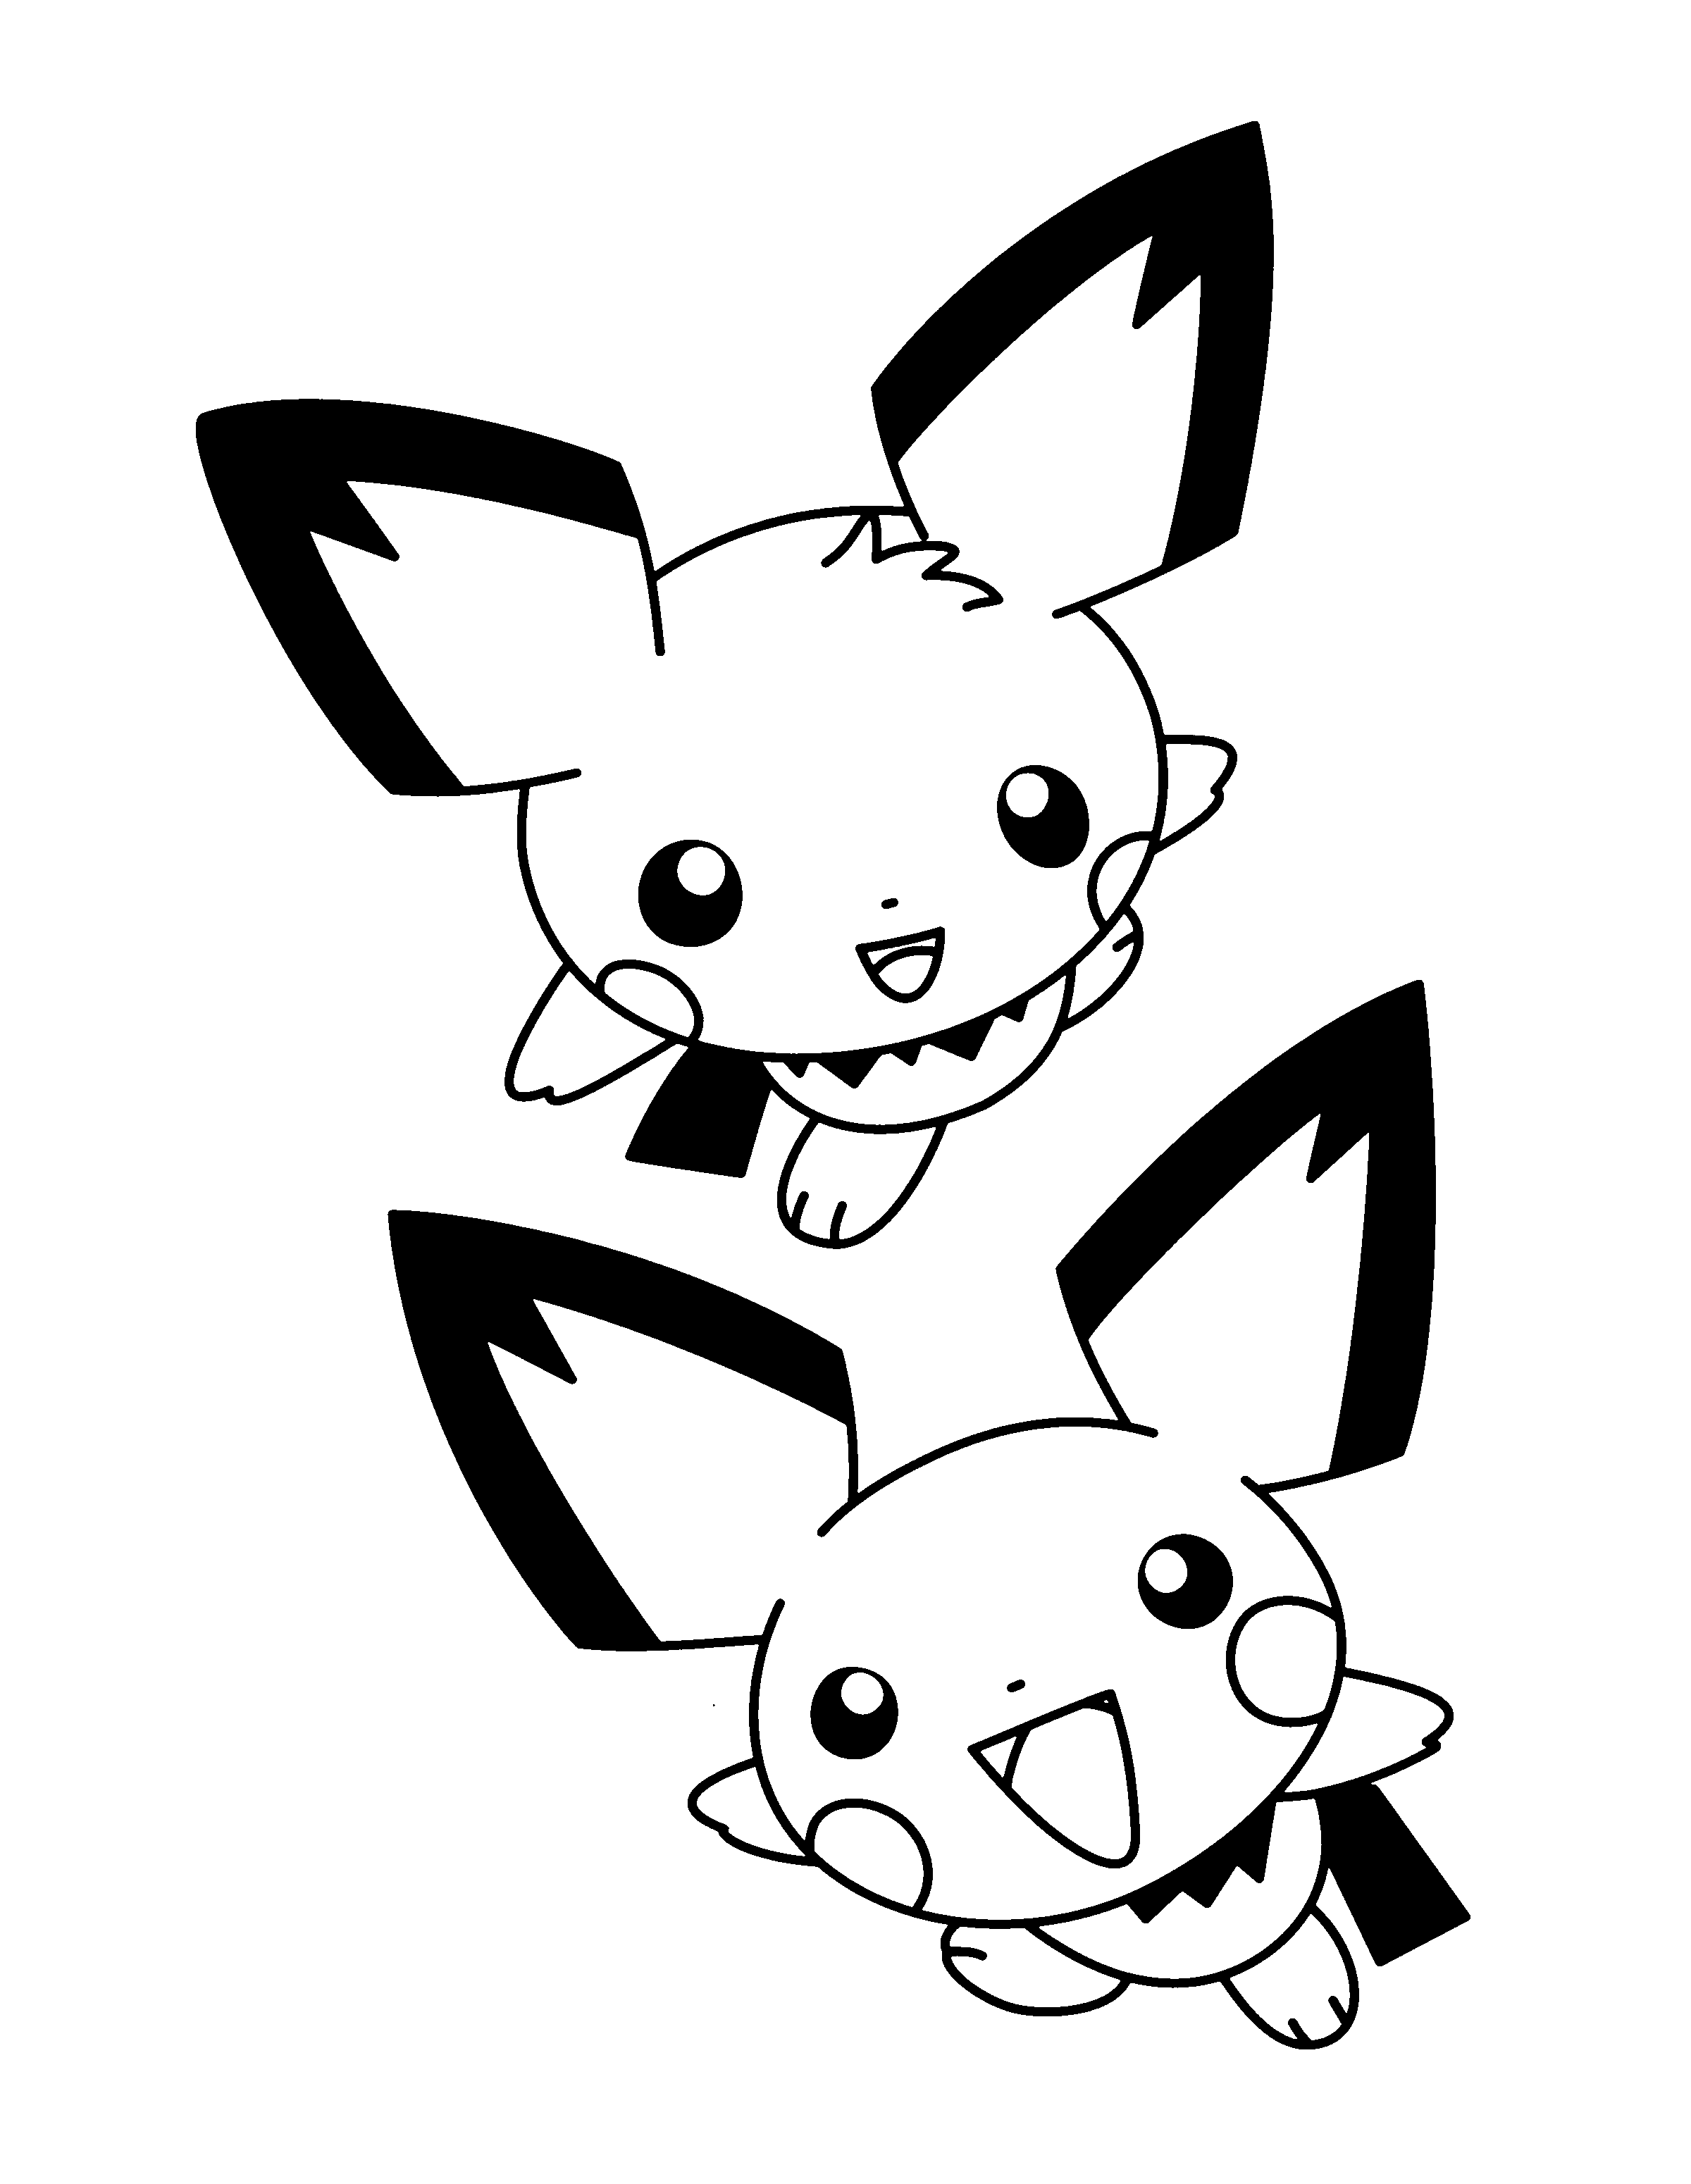 Coloring Page Pokemon Advanced Coloring Pages 131 Pokemon Coloring Pages Horse Coloring Pages Pokemon Coloring